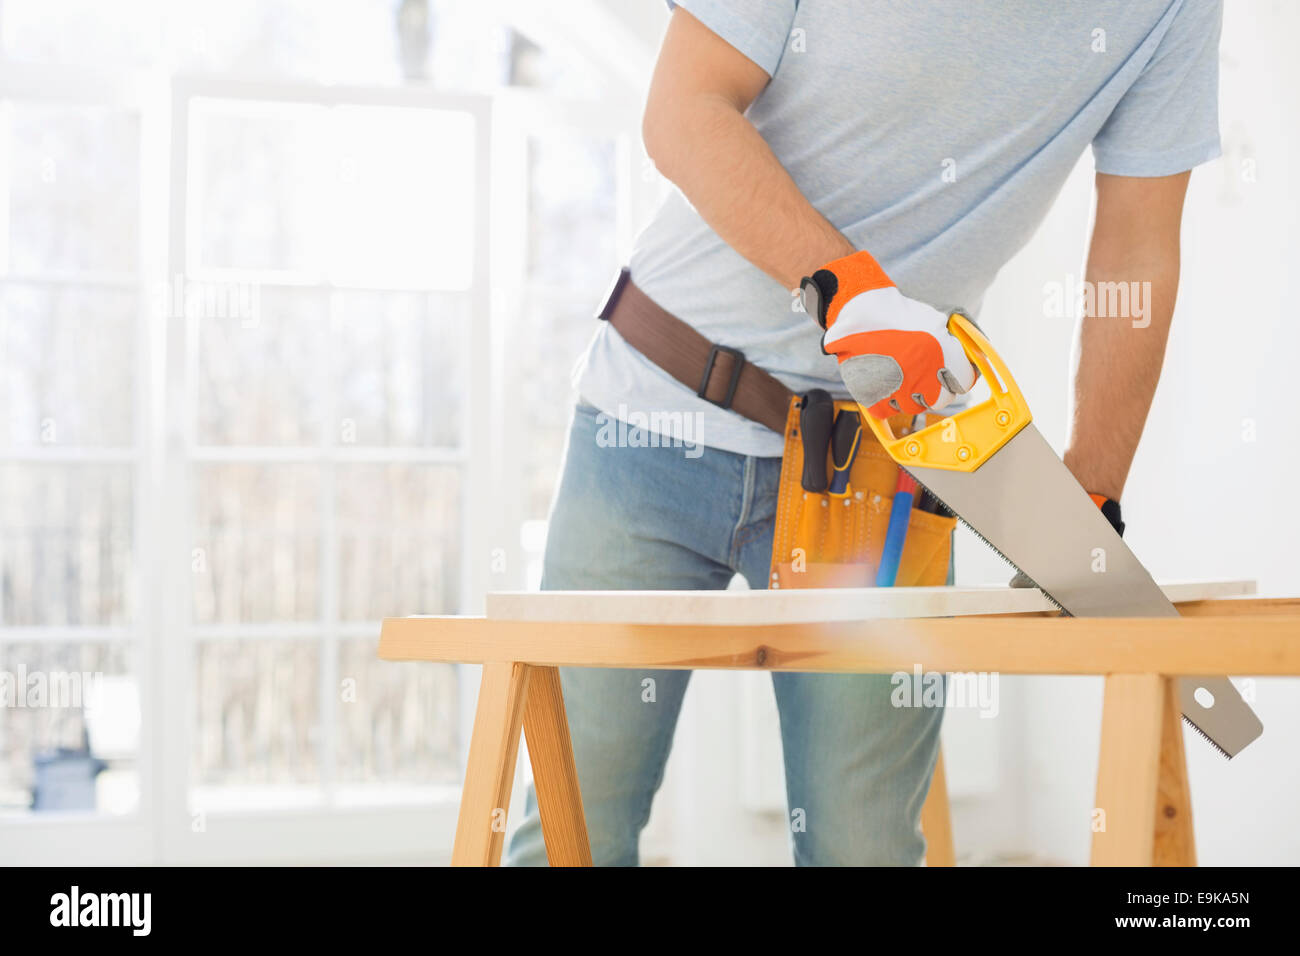 Midsection of man sawing wood in new house Stock Photo